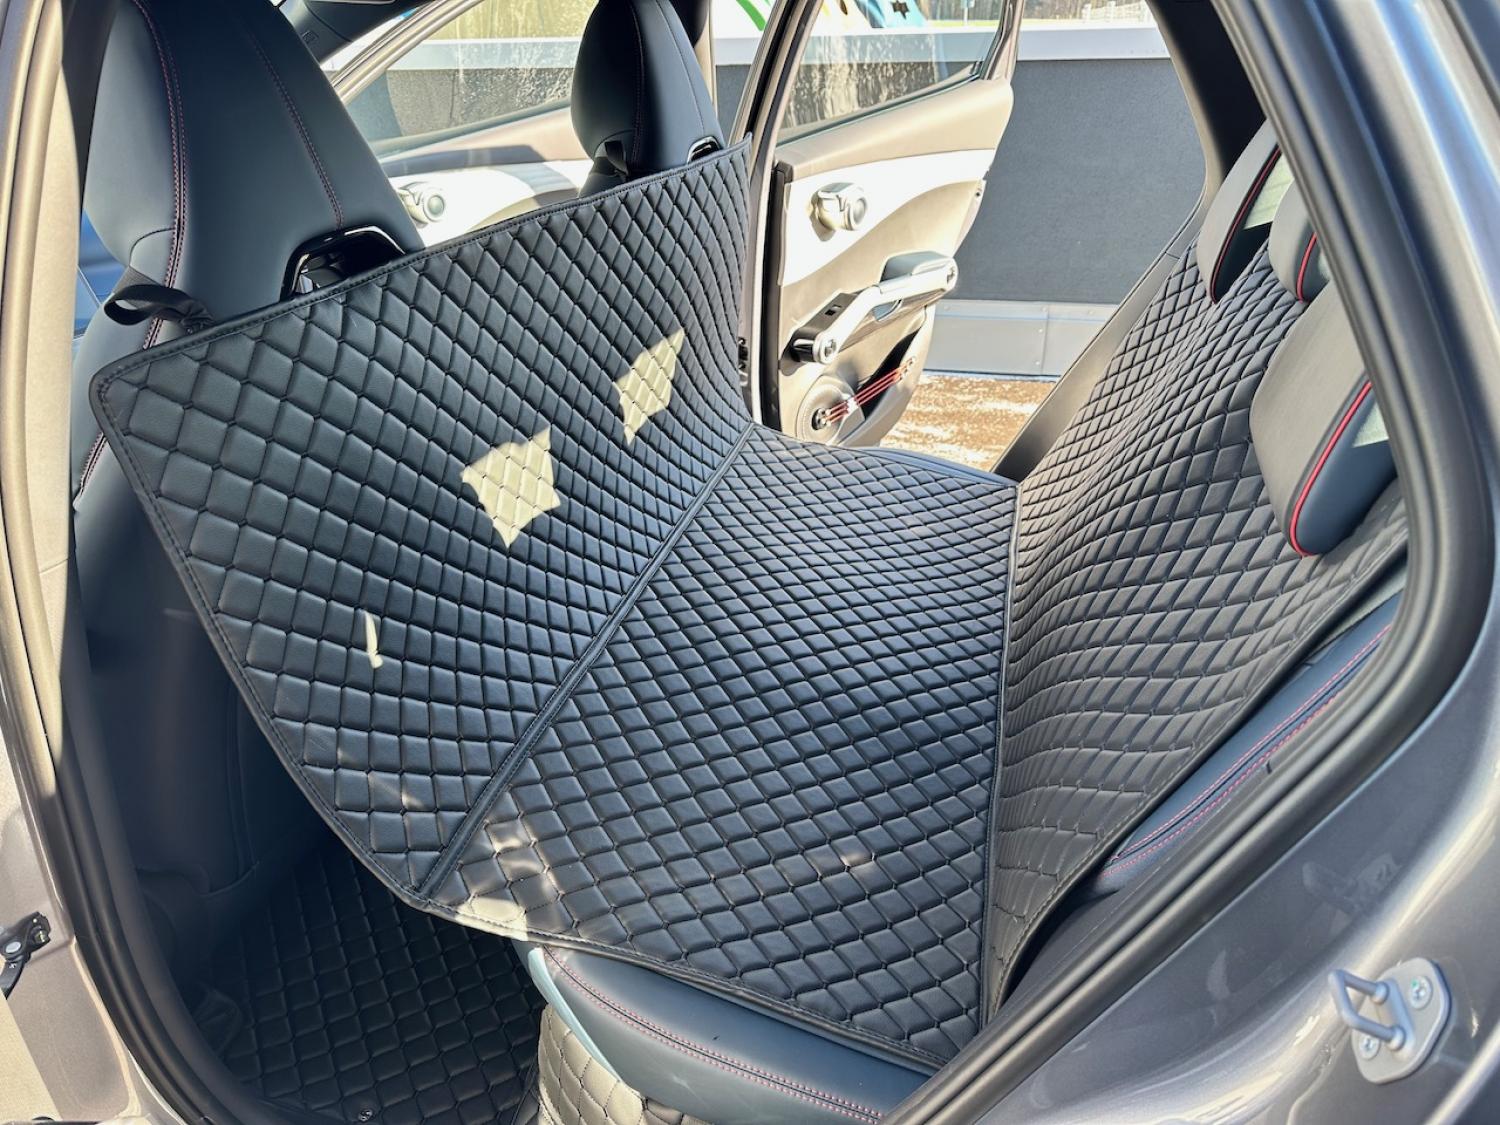 CARSTYLER® Back Seat Cover Geeignet Für Audi Q4 e-tron Tiefer Boden